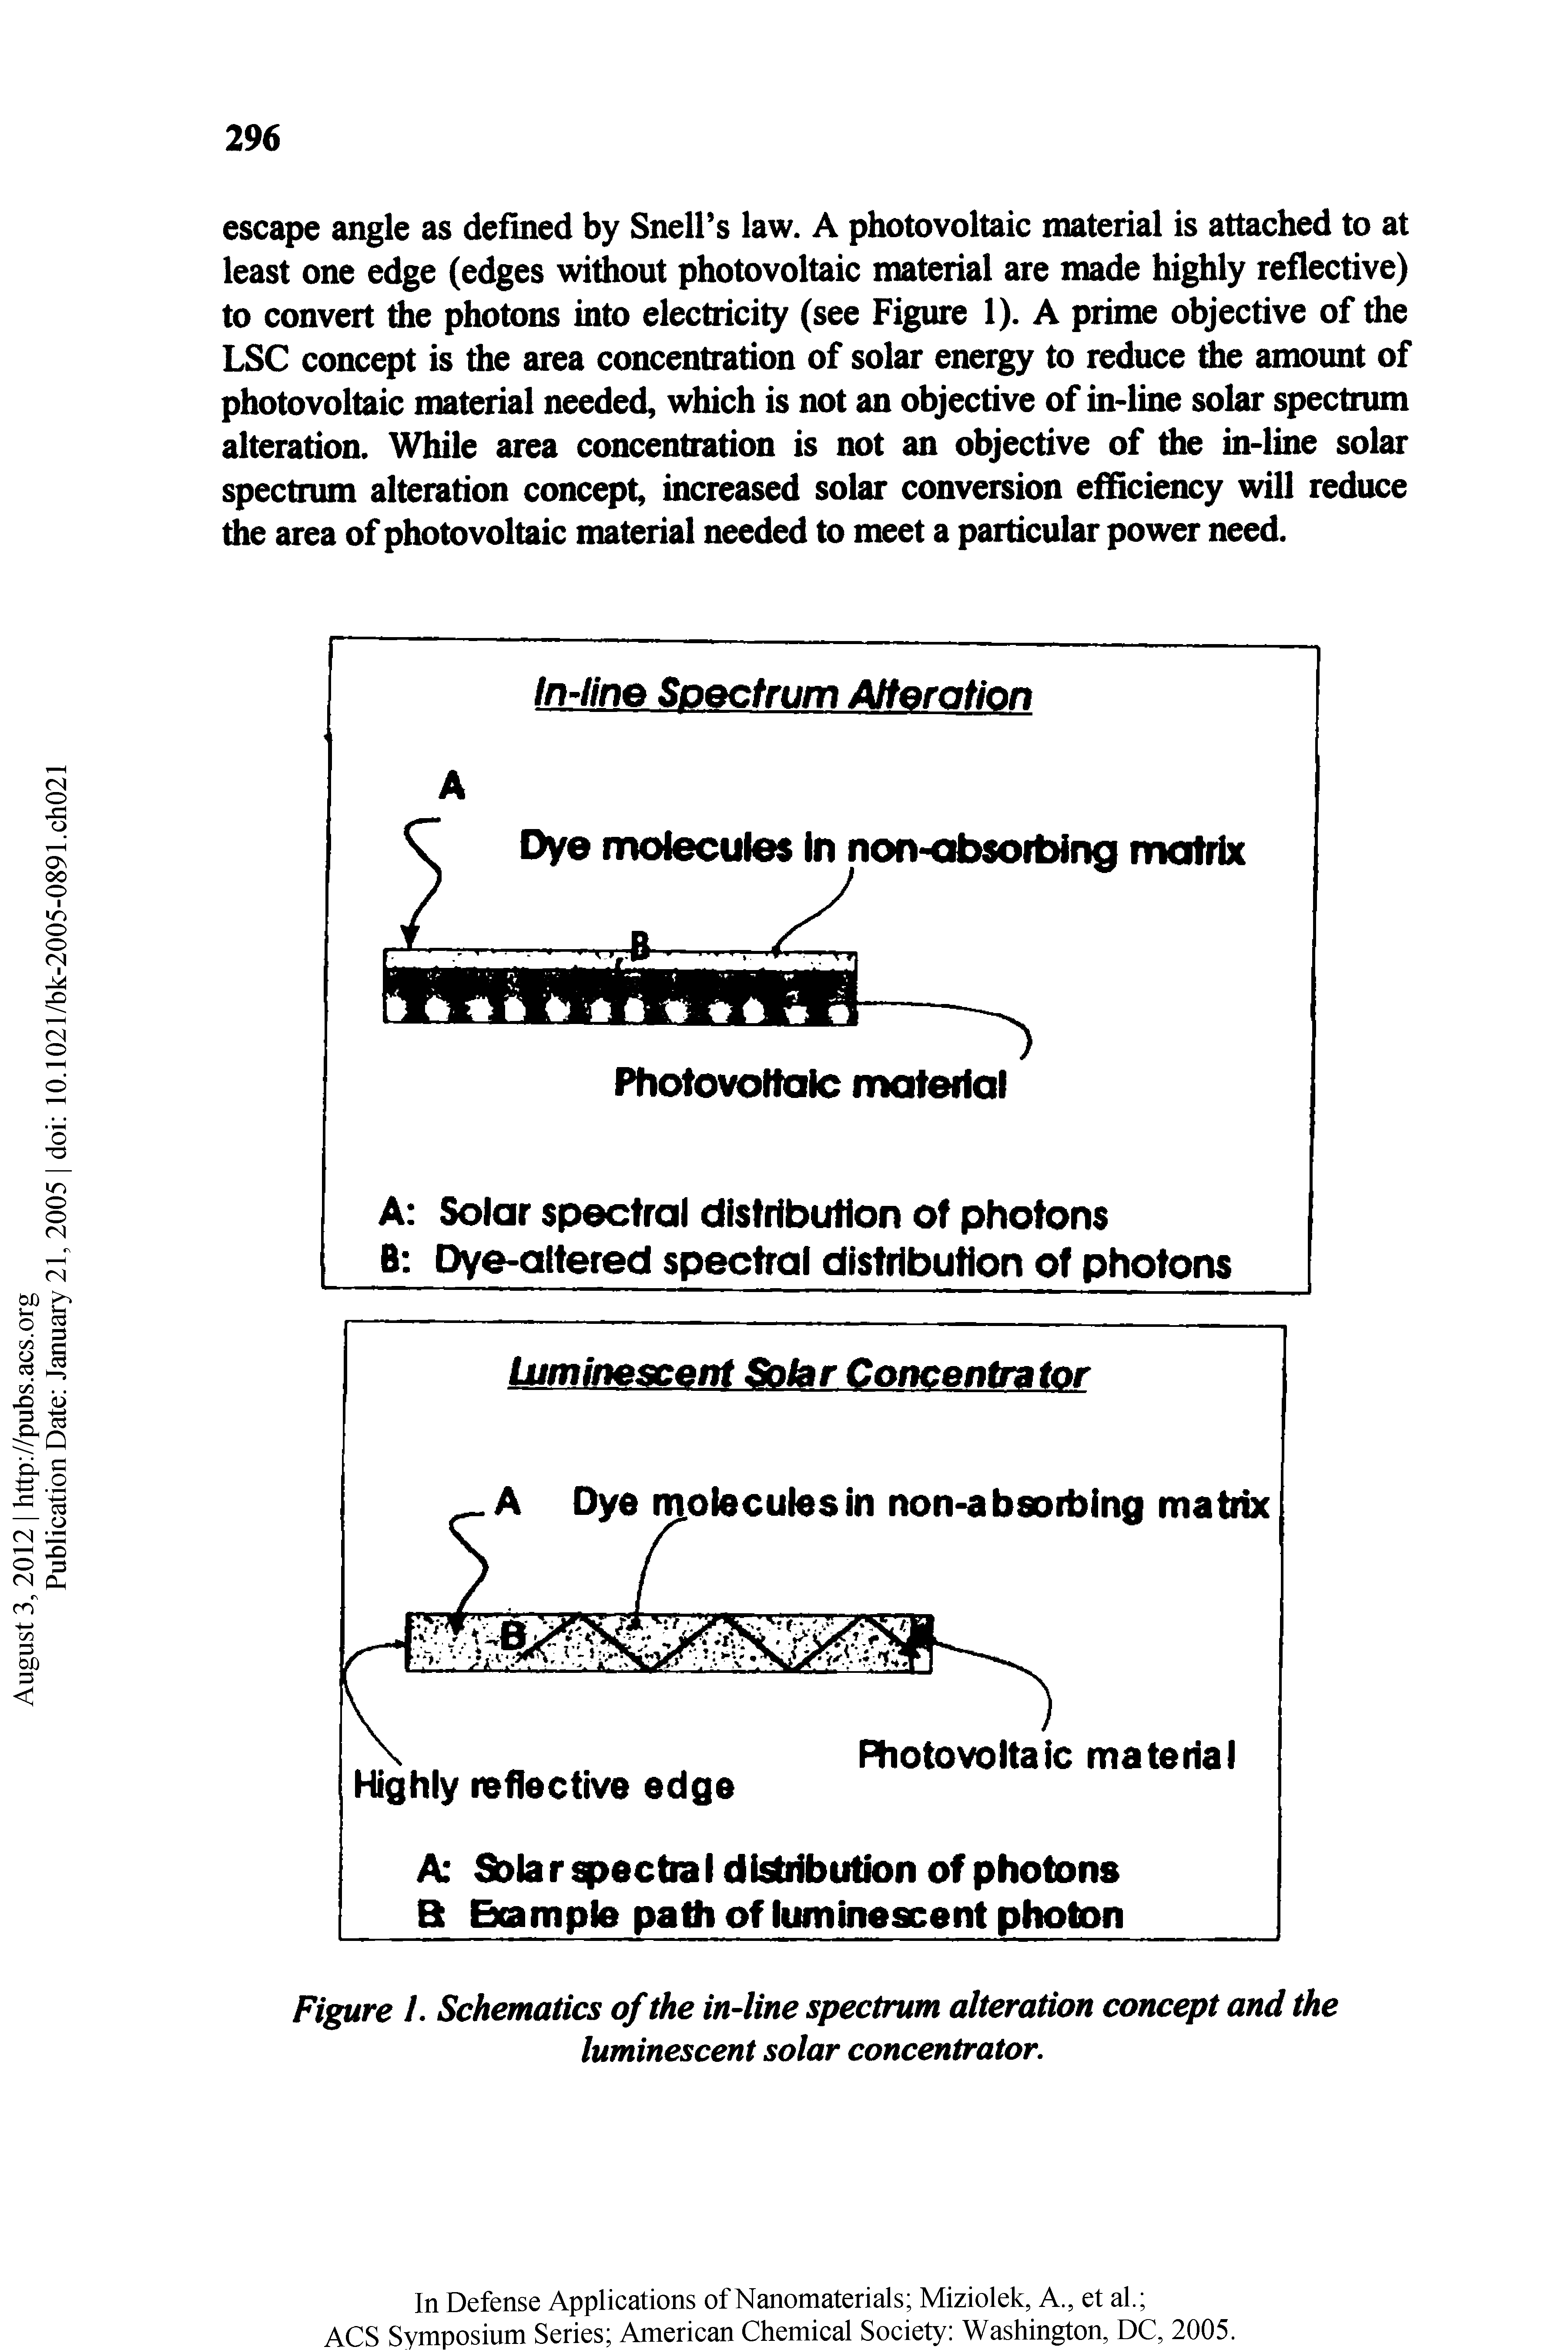 Figure /. Schematics of the in-line spectrum alteration concept and the luminescent solar concentrator.